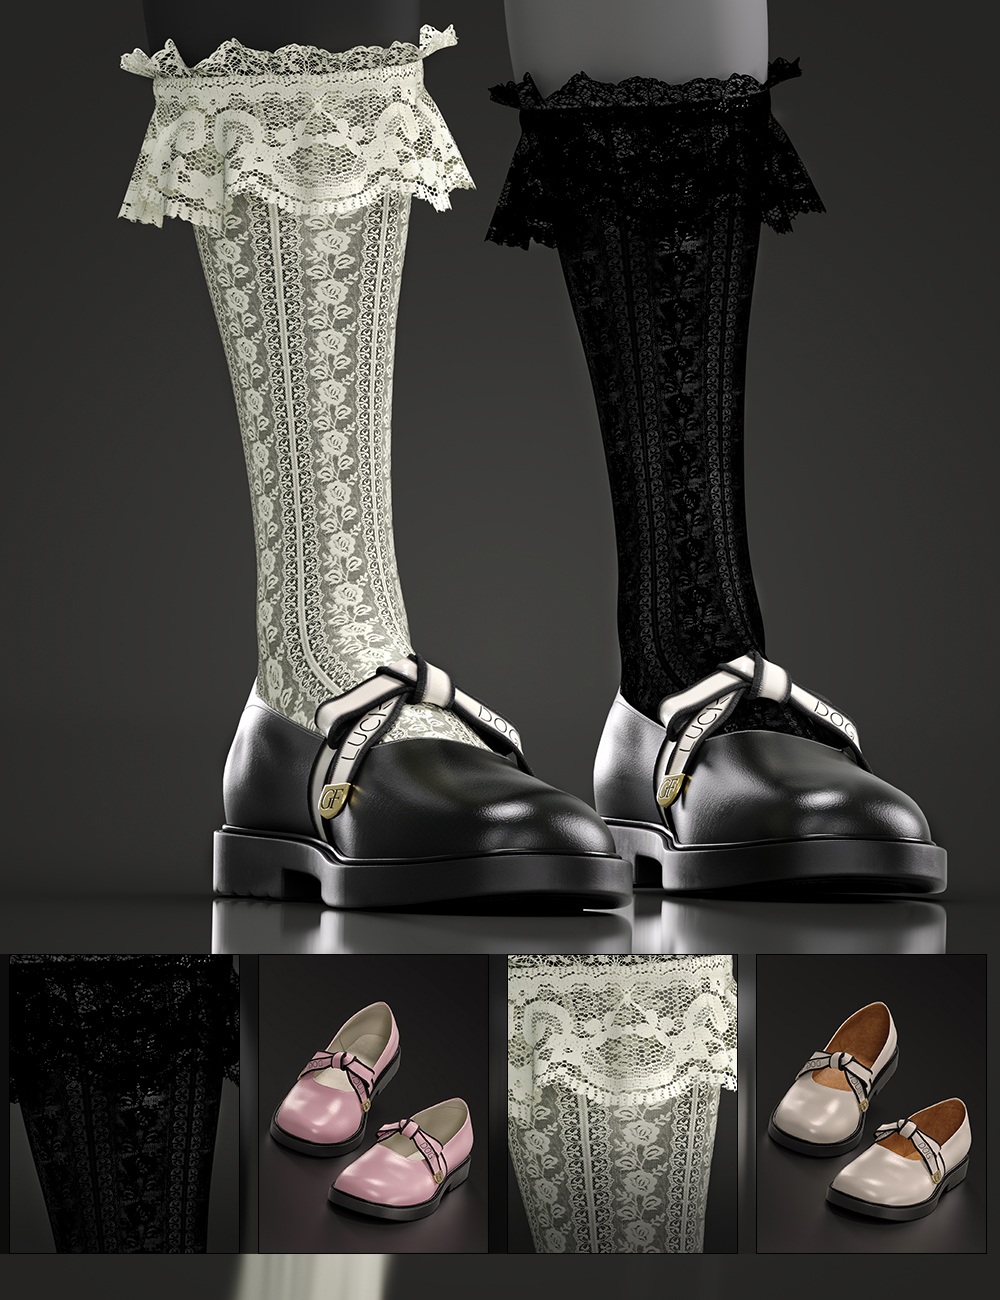 Rainy Koo Socks and Shoes for Genesis 8 and 8.1 Females